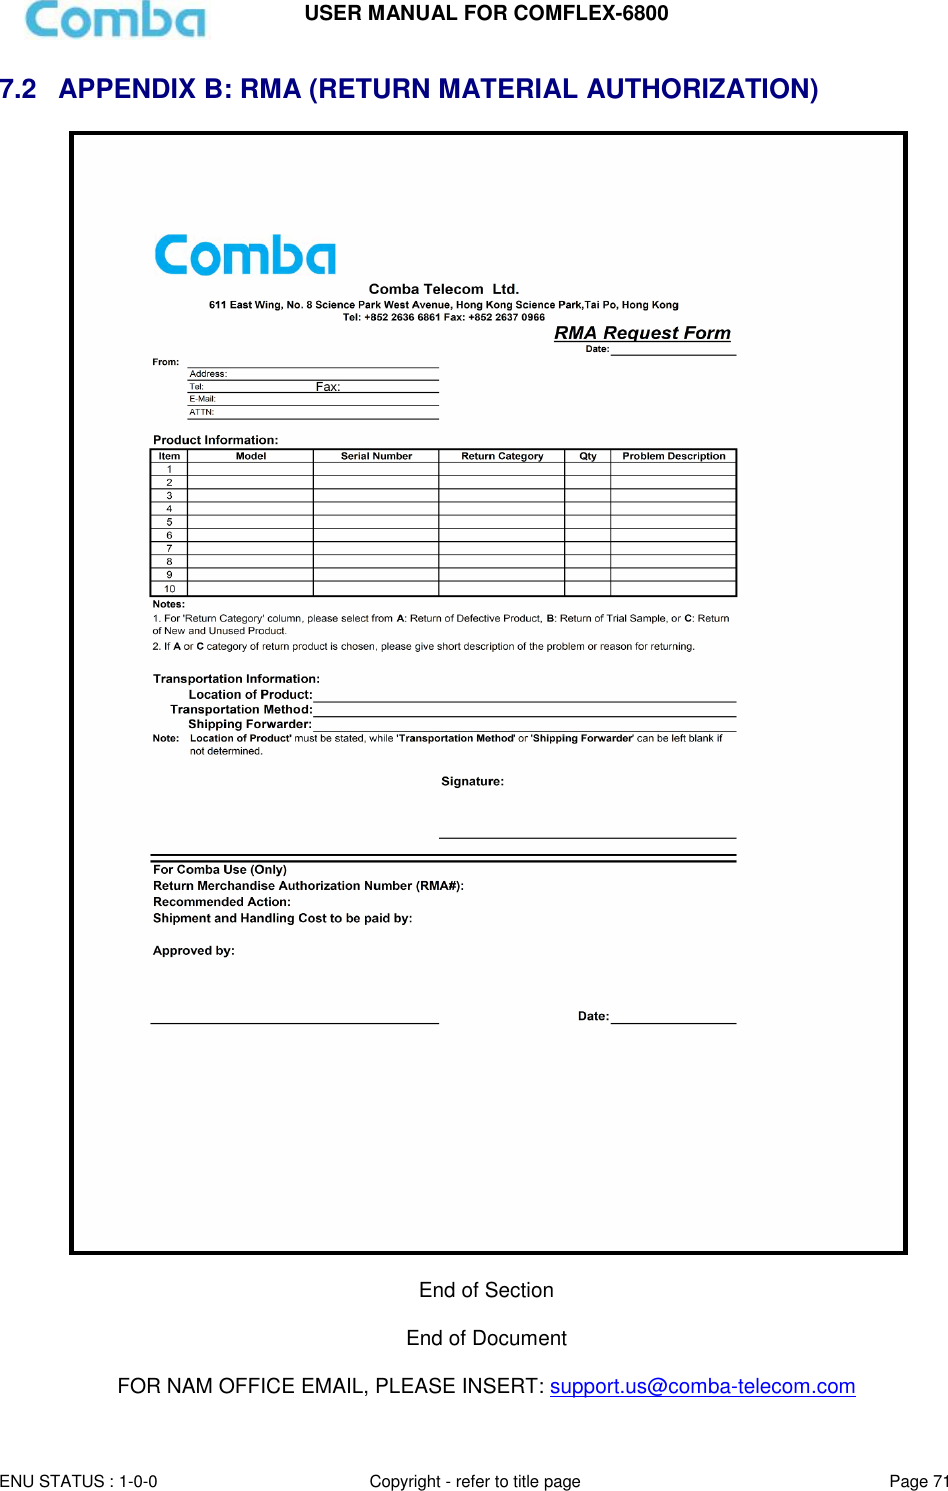 USER MANUAL FOR COMFLEX-6800   ENU STATUS : 1-0-0 Copyright - refer to title page Page 71     7.2  APPENDIX B: RMA (RETURN MATERIAL AUTHORIZATION)   End of Section  End of Document  FOR NAM OFFICE EMAIL, PLEASE INSERT: support.us@comba-telecom.com  